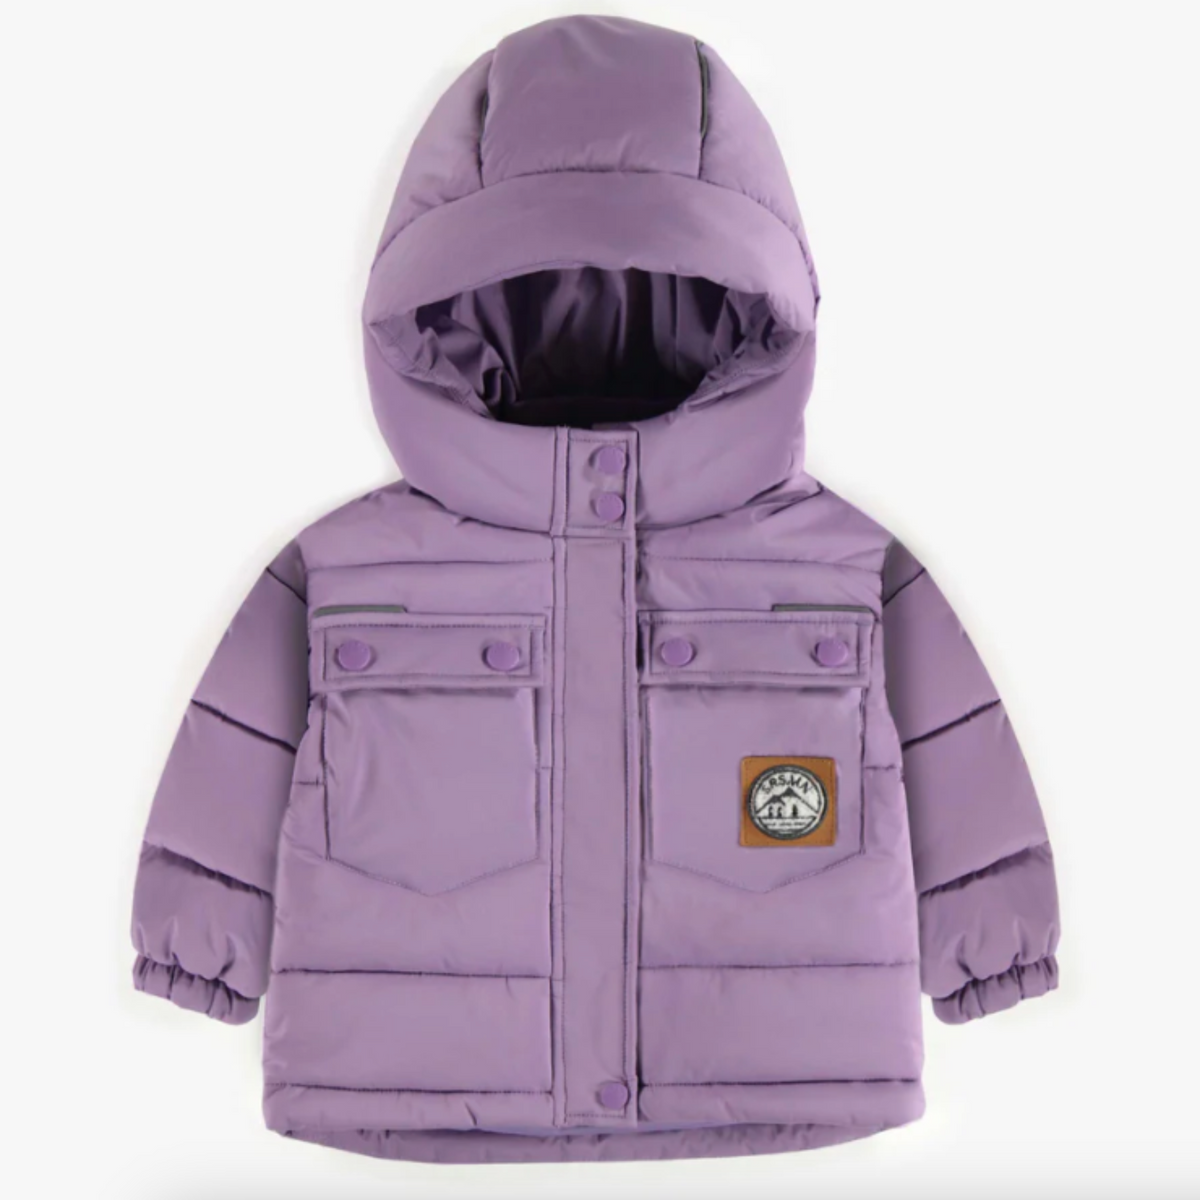 Purple Down Jacket with High Collar and Nylon Hood, Toddler